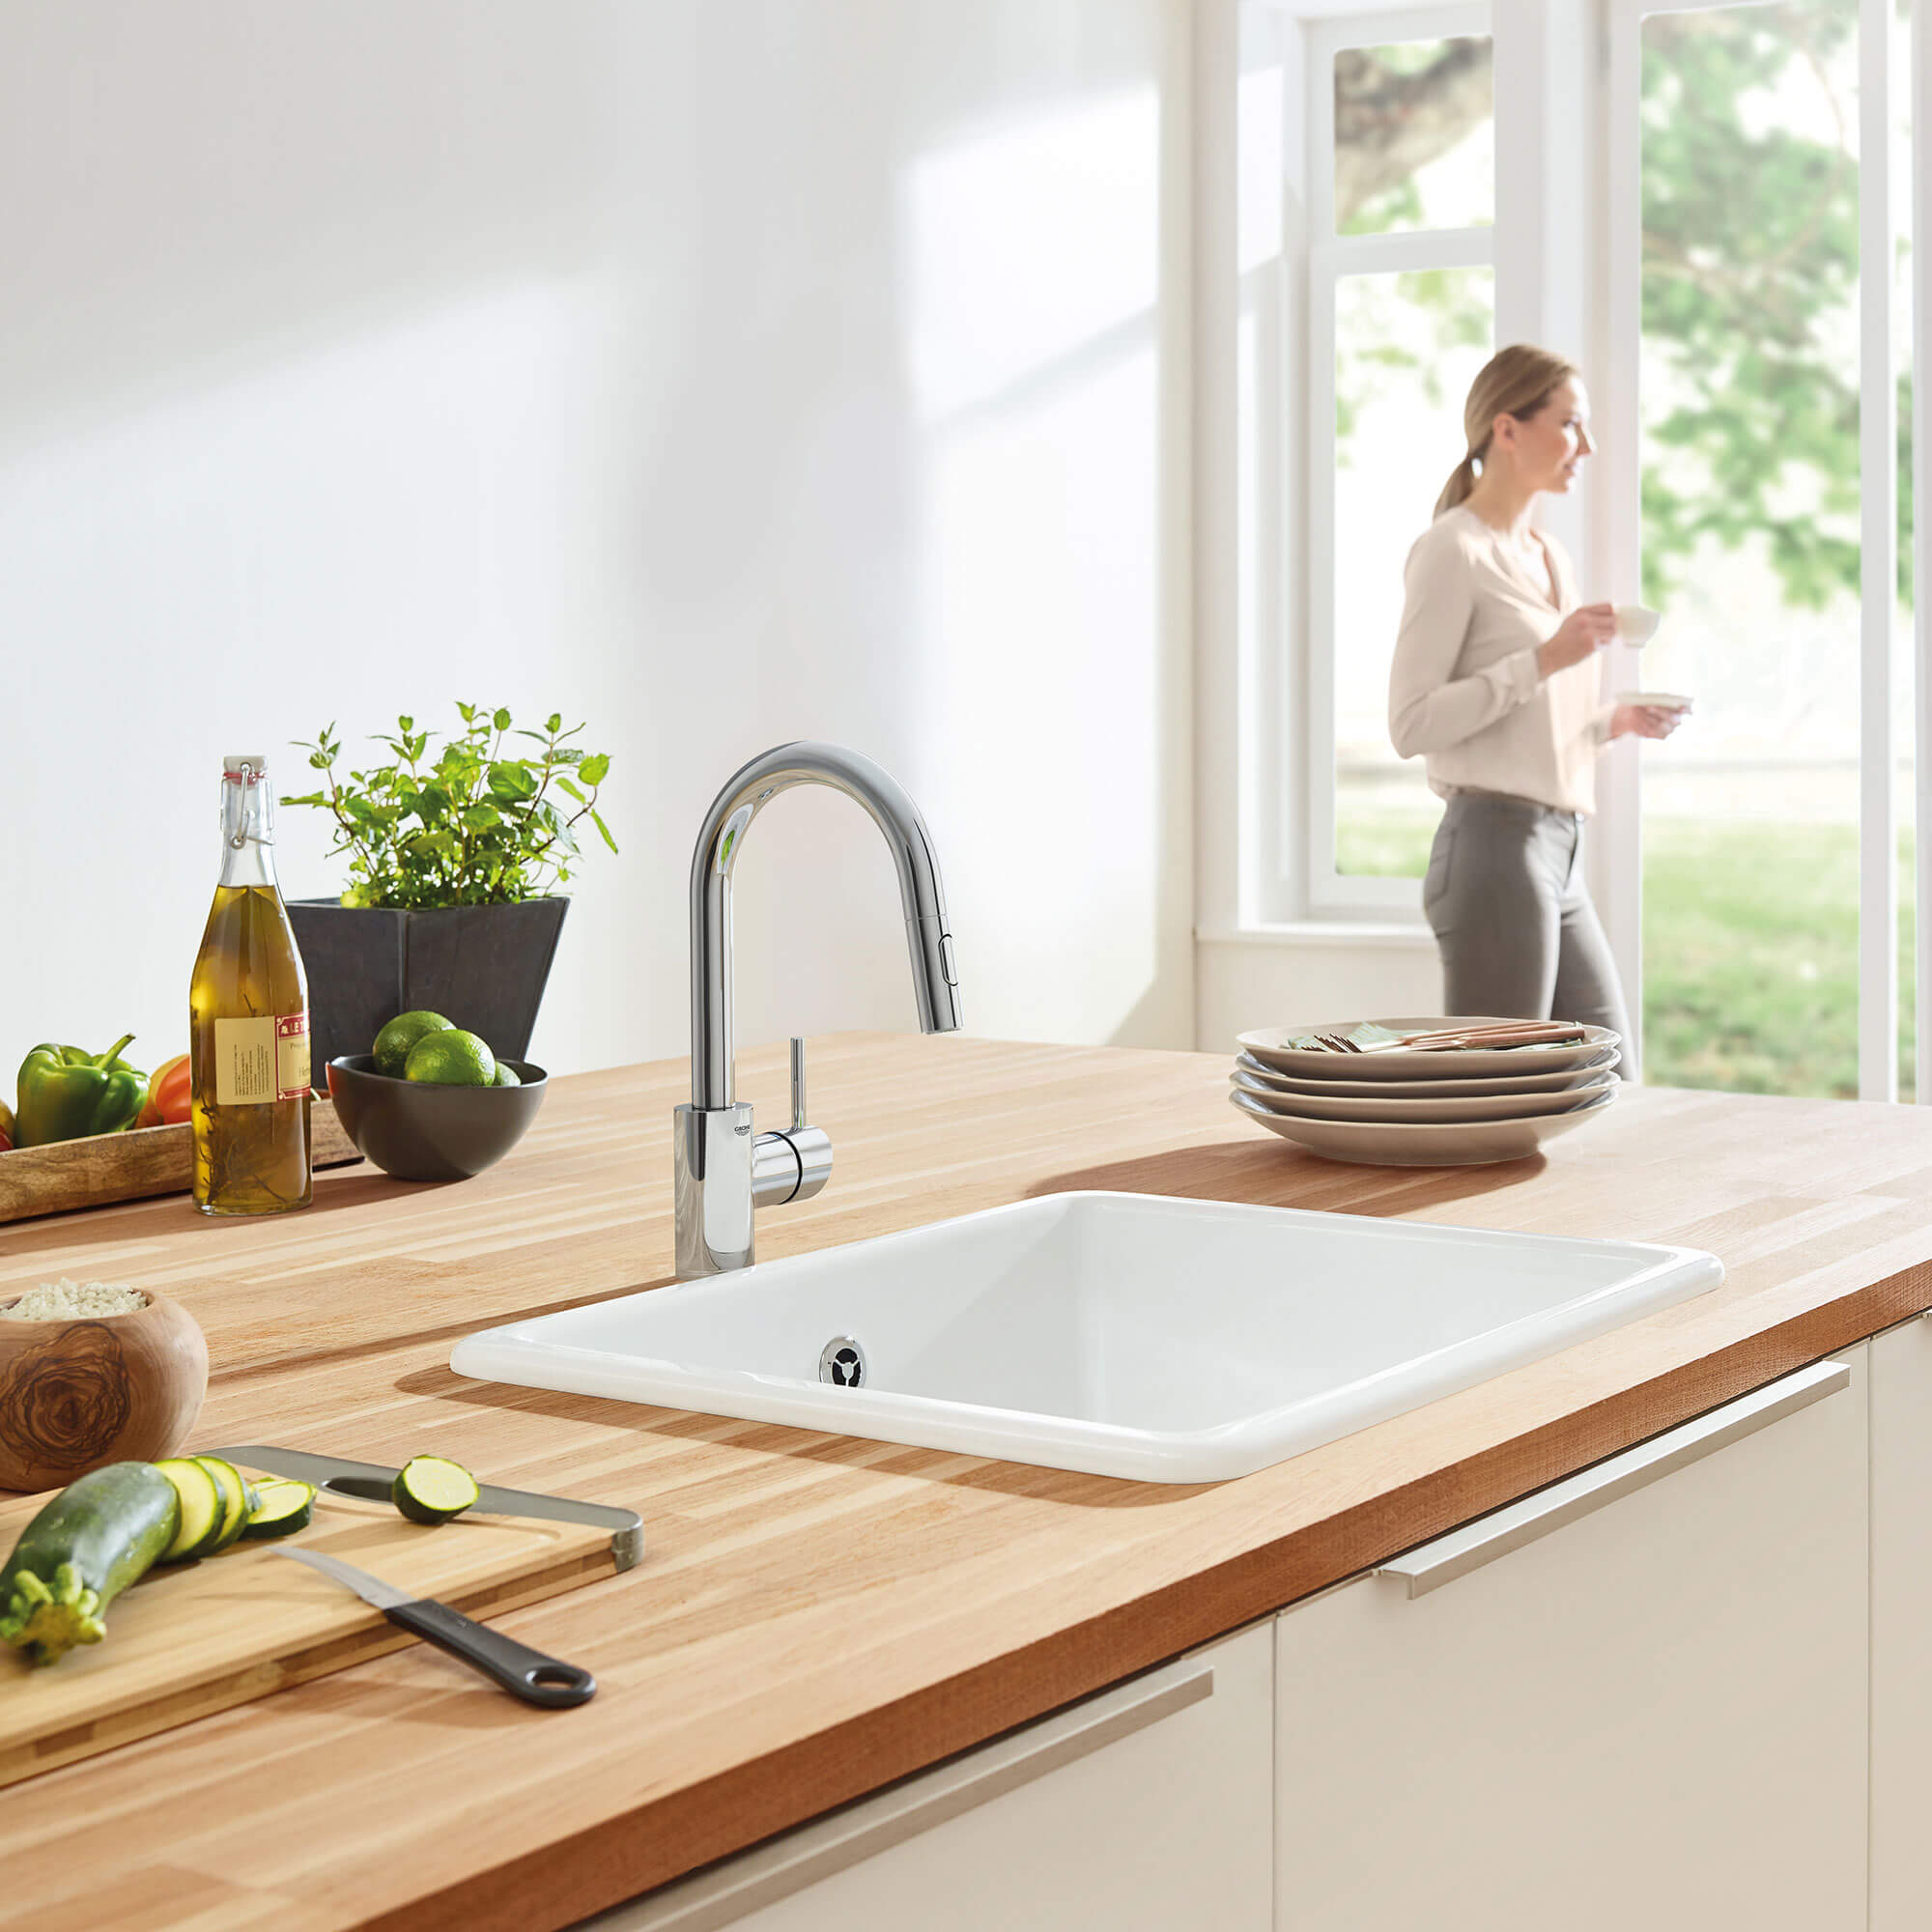 Concetta Kitchen Faucet in Kitchen with Food and a Woman Standing Near a Door